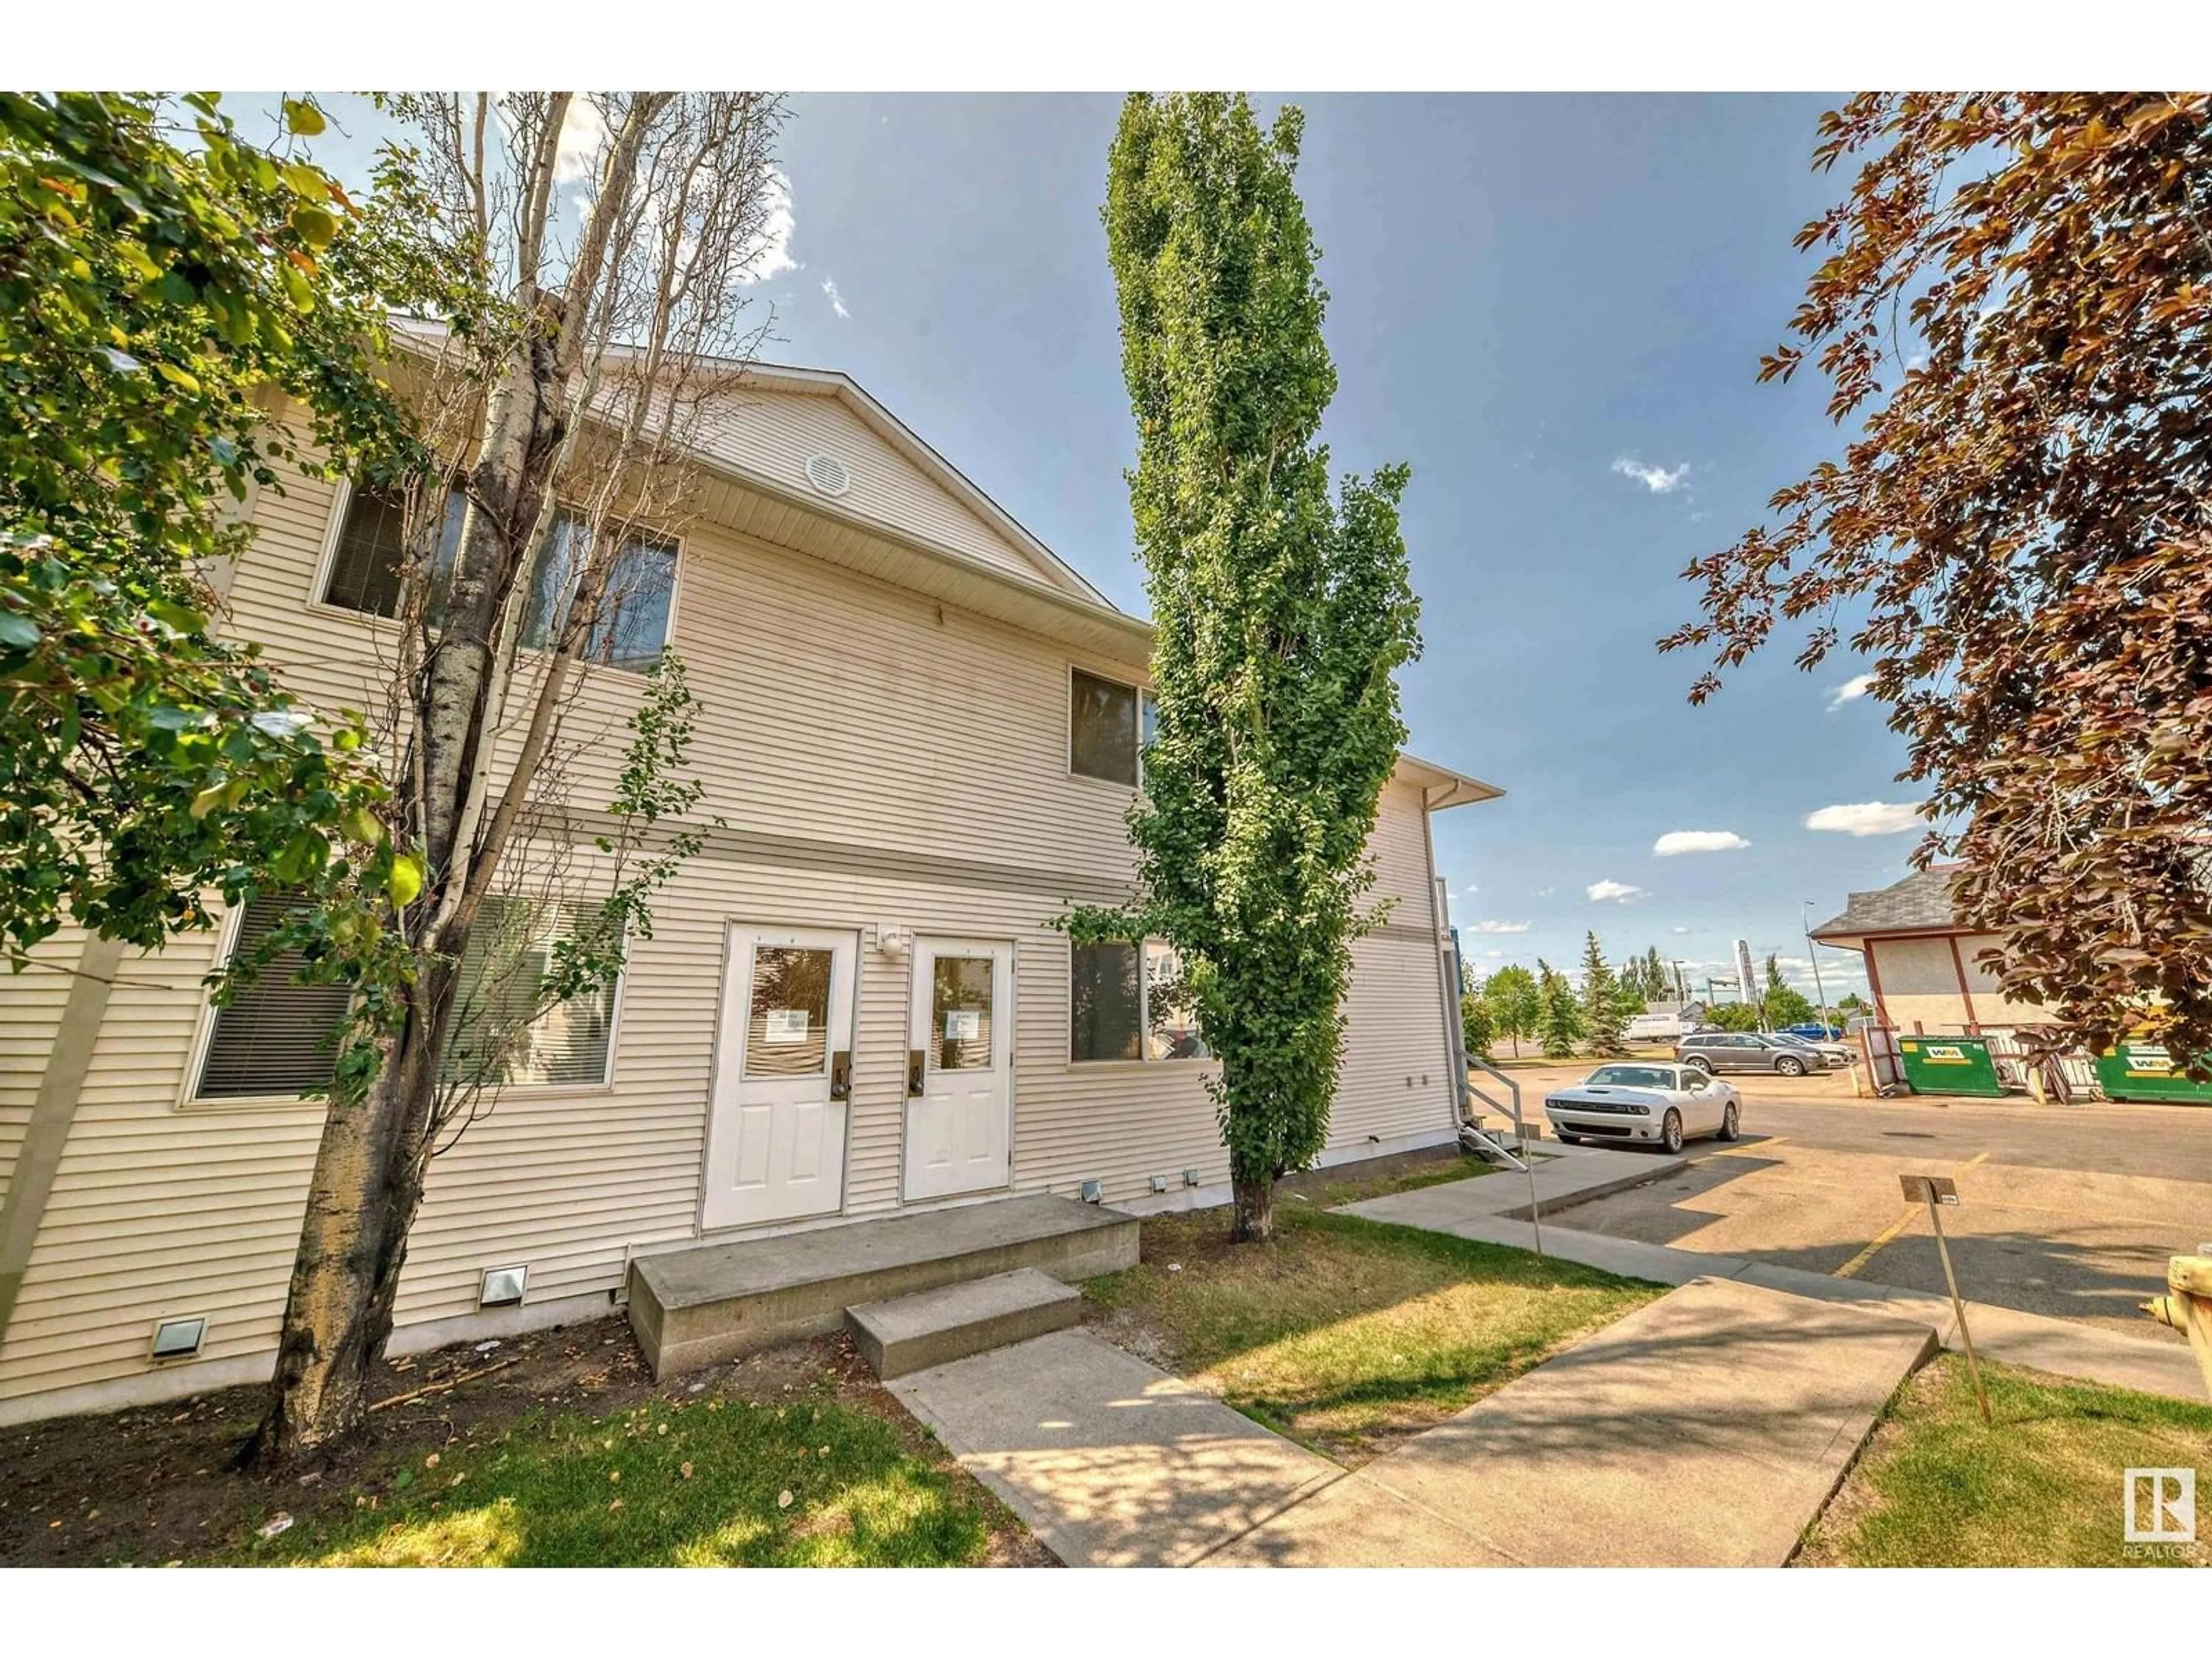 A pic from exterior of the house or condo for #203 620 KING ST, Spruce Grove Alberta T7X4K1